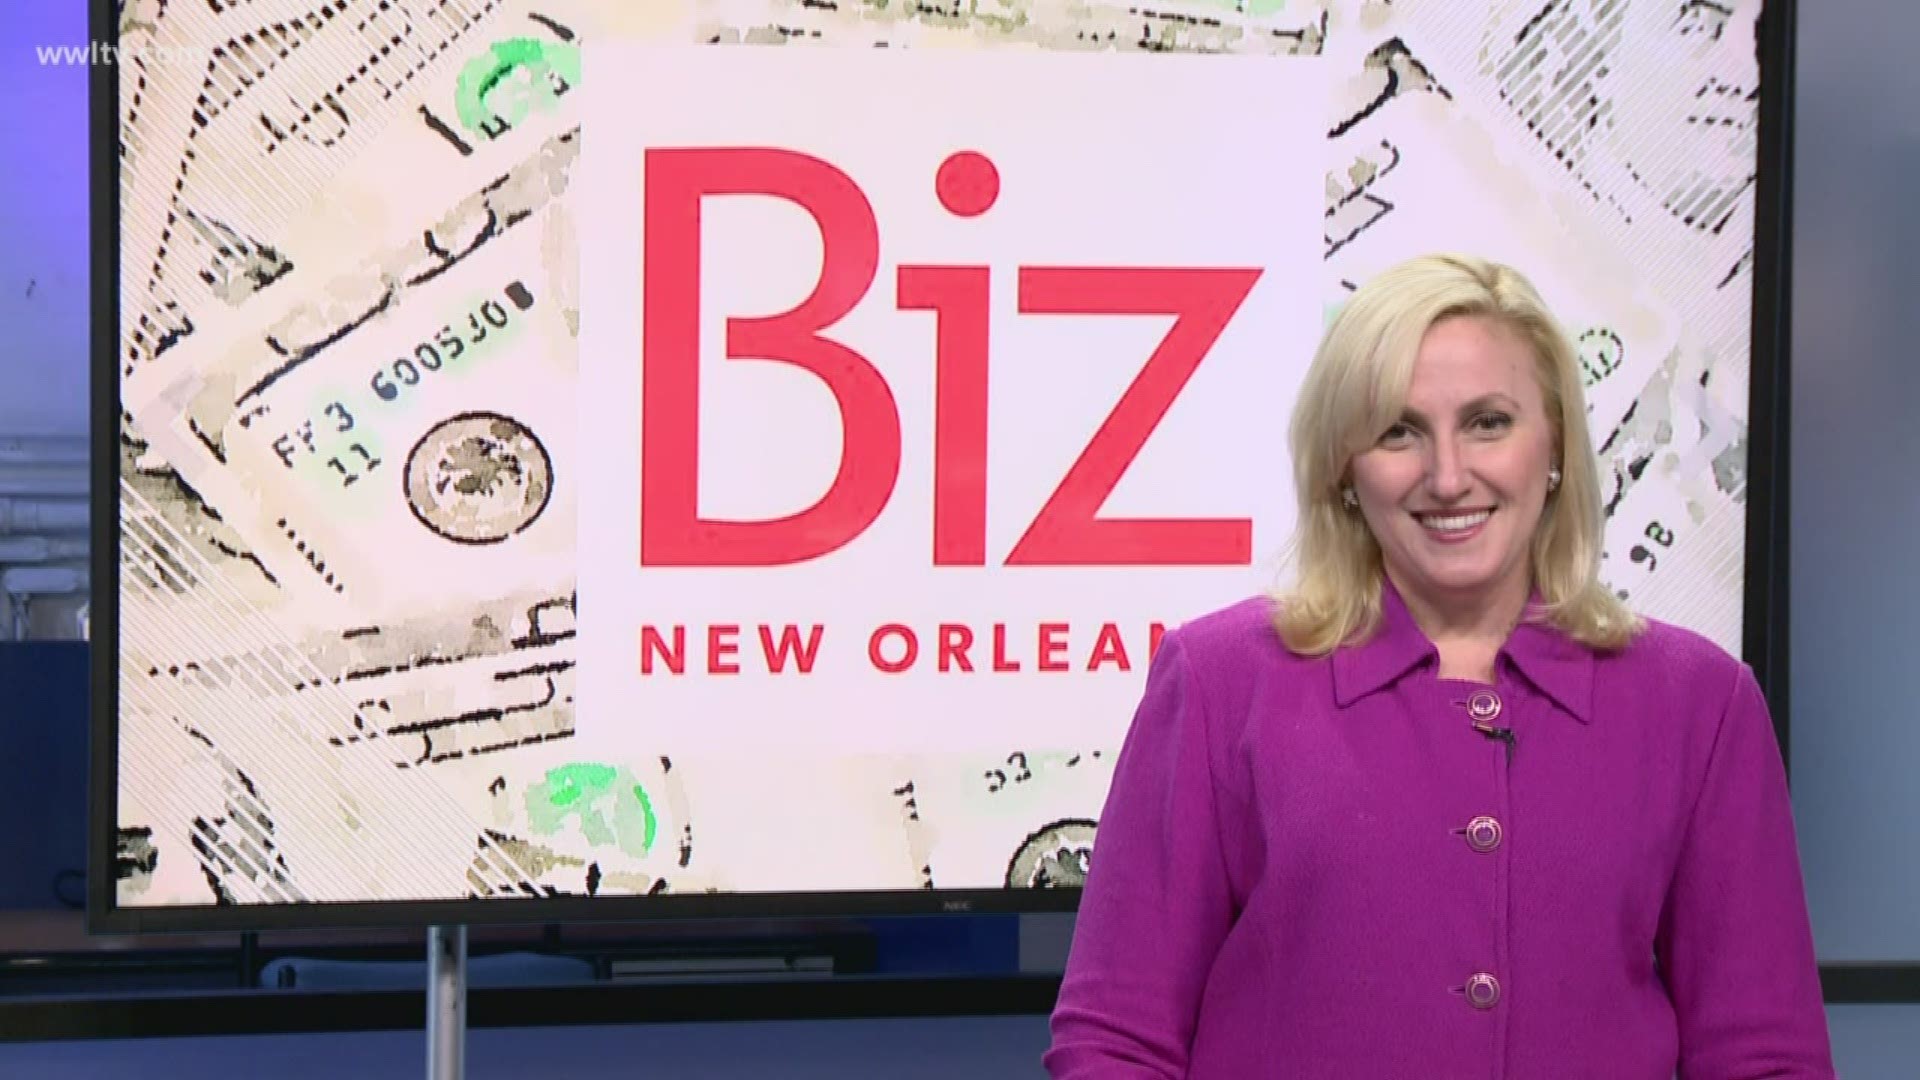 Life insurance can help protect your retirement income and provide funds for major expenses, but should you buy a new policy later in life? Biz New Orleans' Leslie Snadowsky has more about life insurance and why you should consider buying a policy in your 50s and 60s.